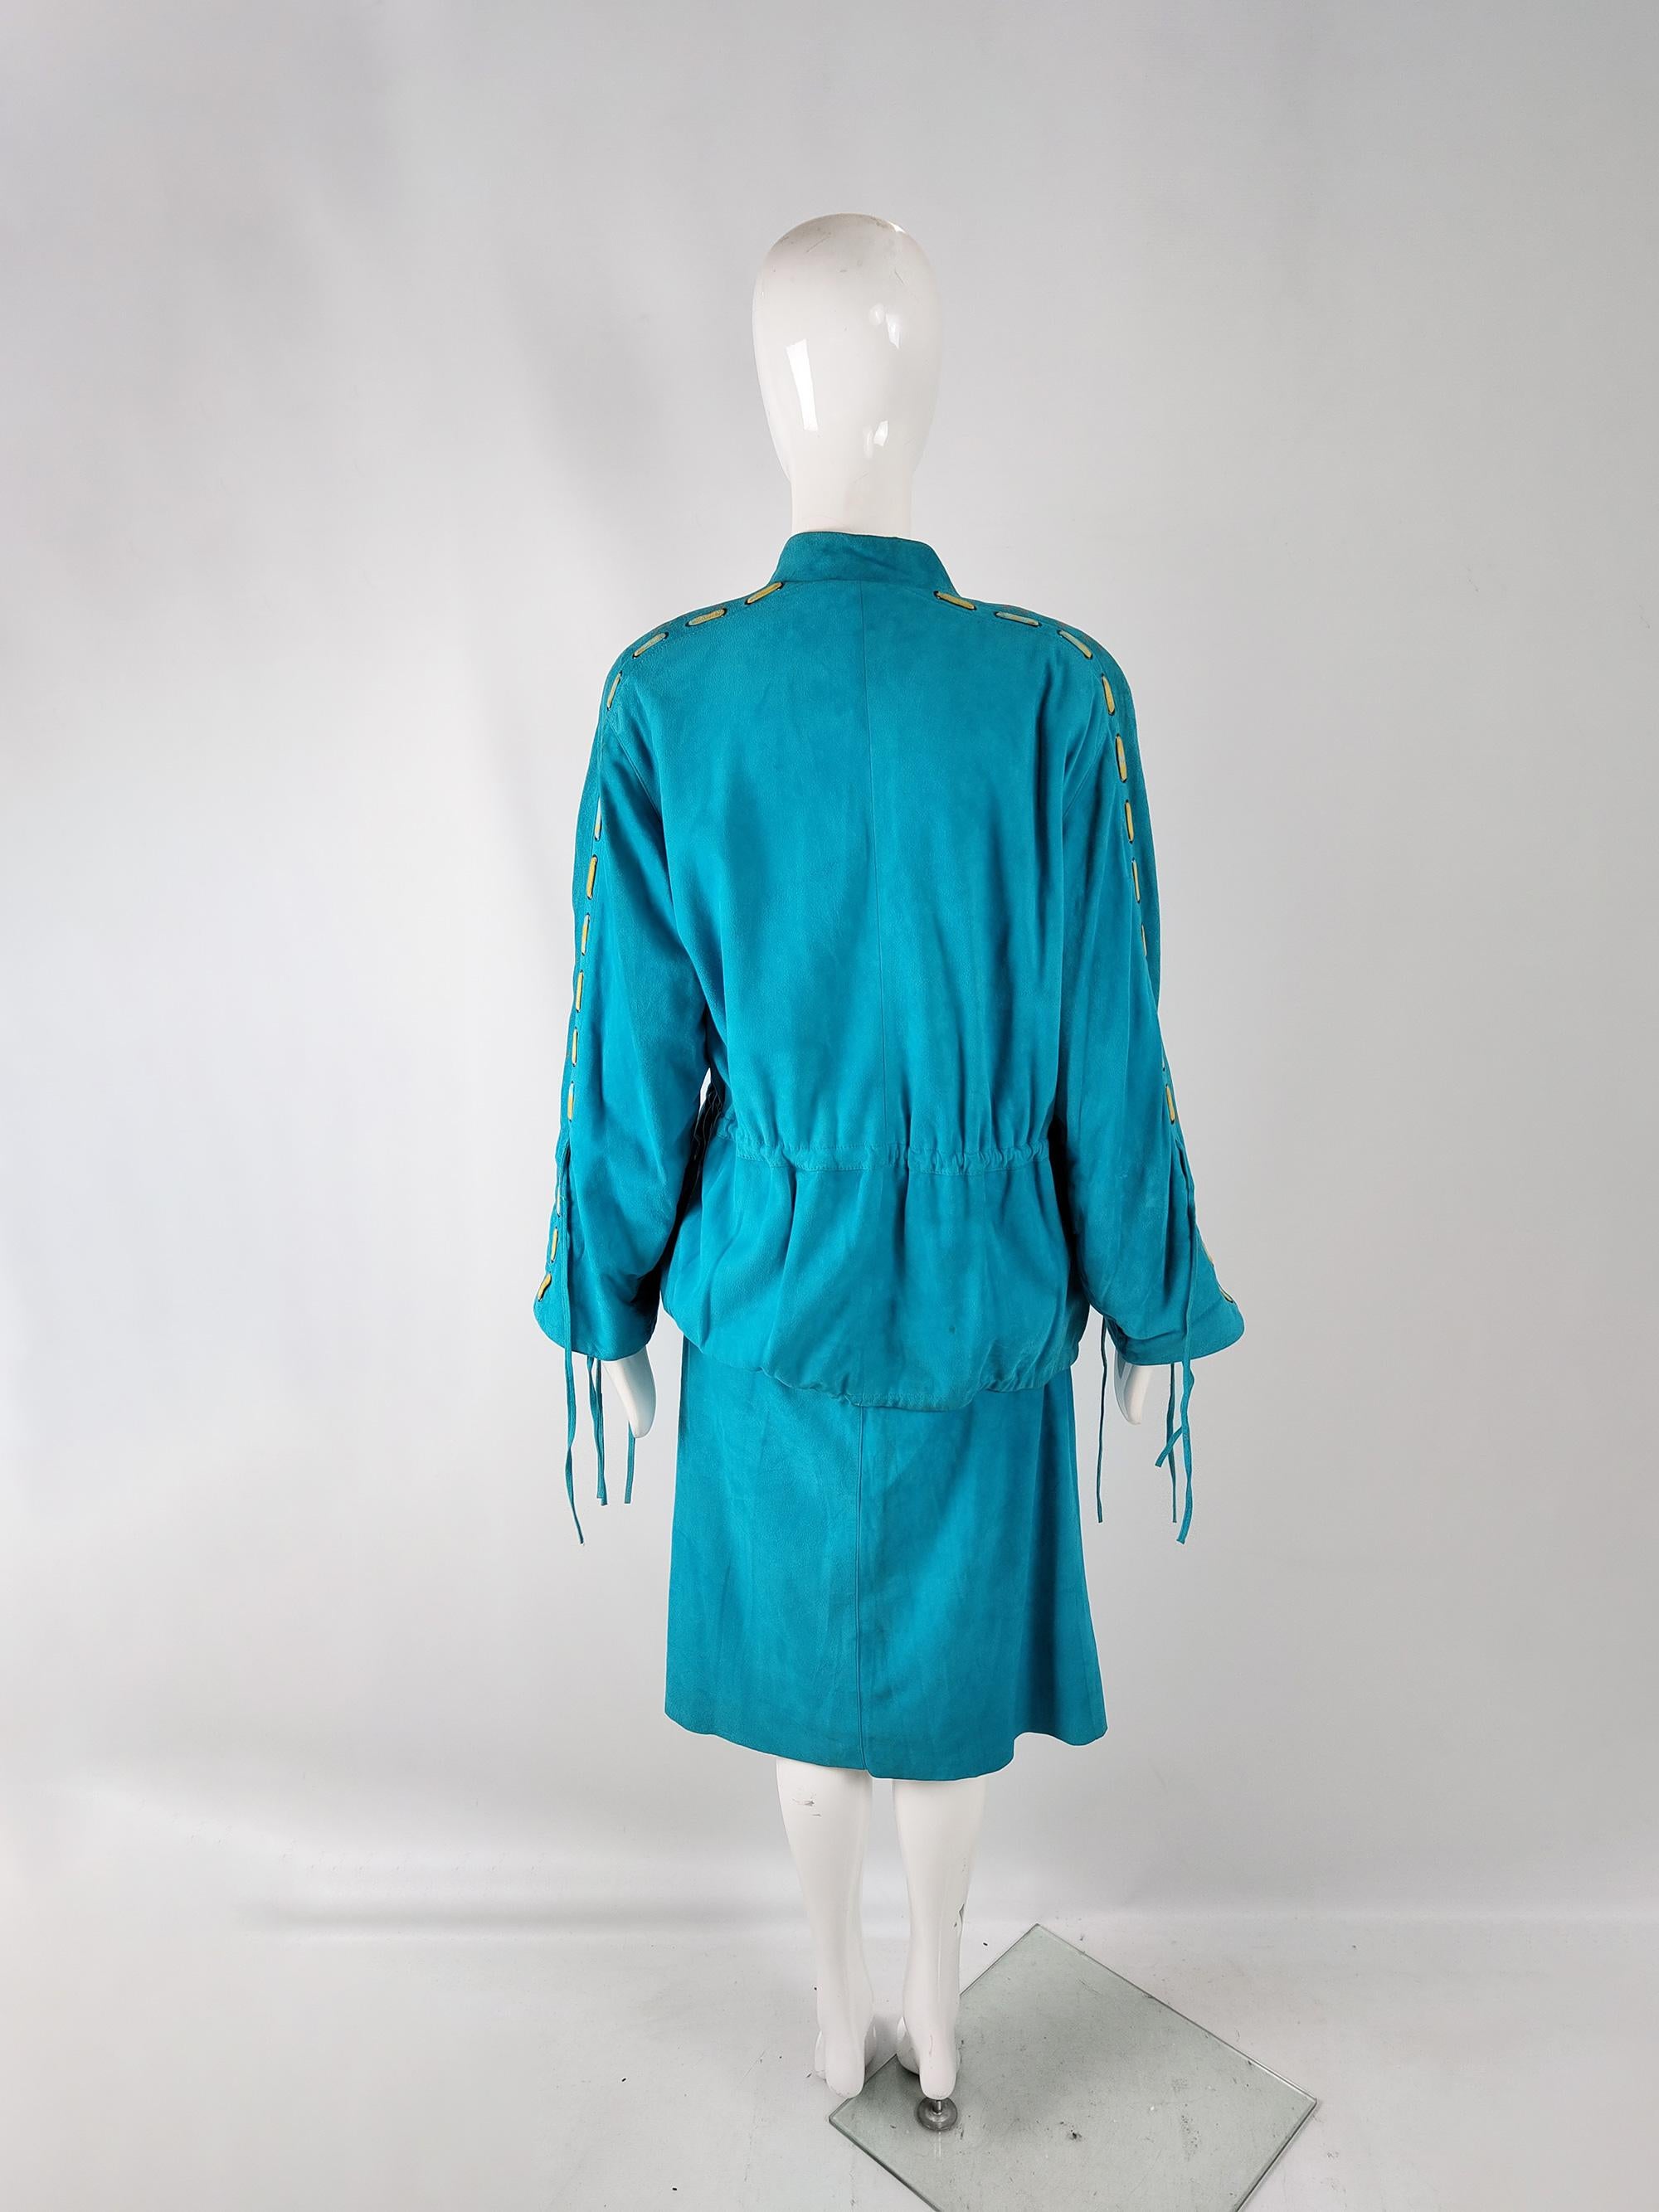 Women's Enrico Coveri Vintage Turquoise & Mustard Real Suede Jacket & Skirt Suit, 1980s